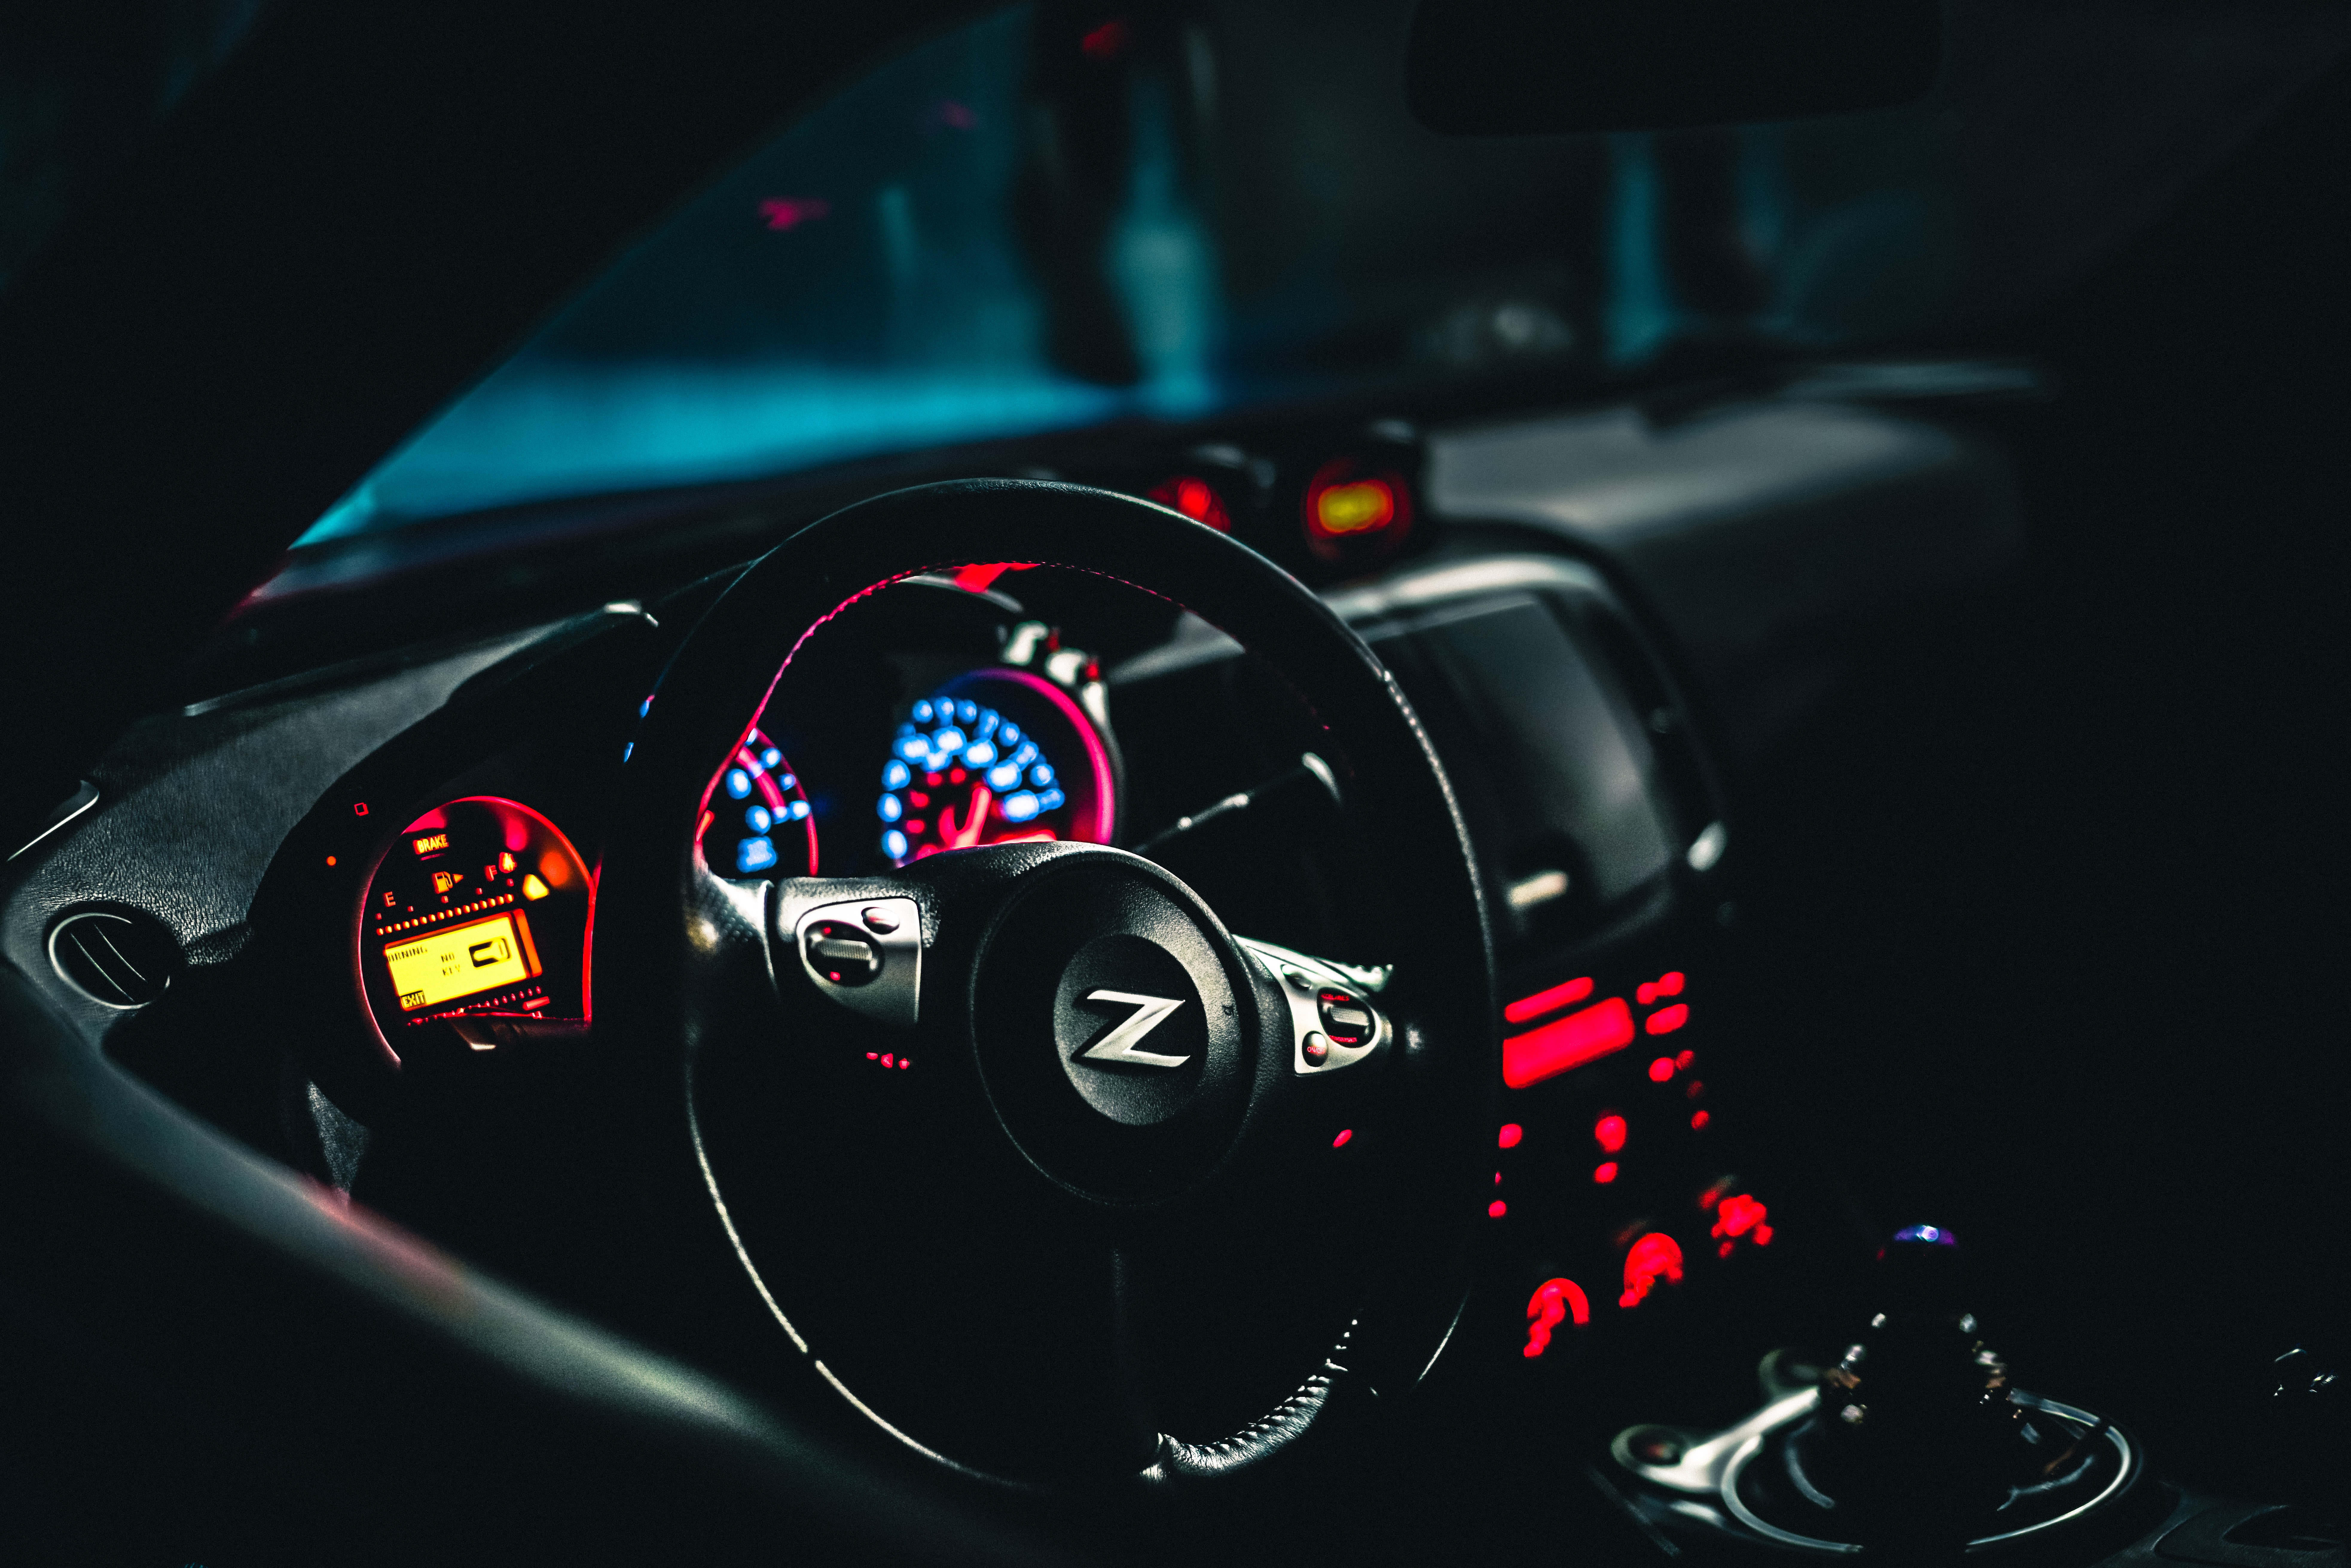 136204 Screensavers and Wallpapers Steering Wheel for phone. Download cars, black, car, machine, backlight, illumination, steering wheel, rudder, dashboard pictures for free